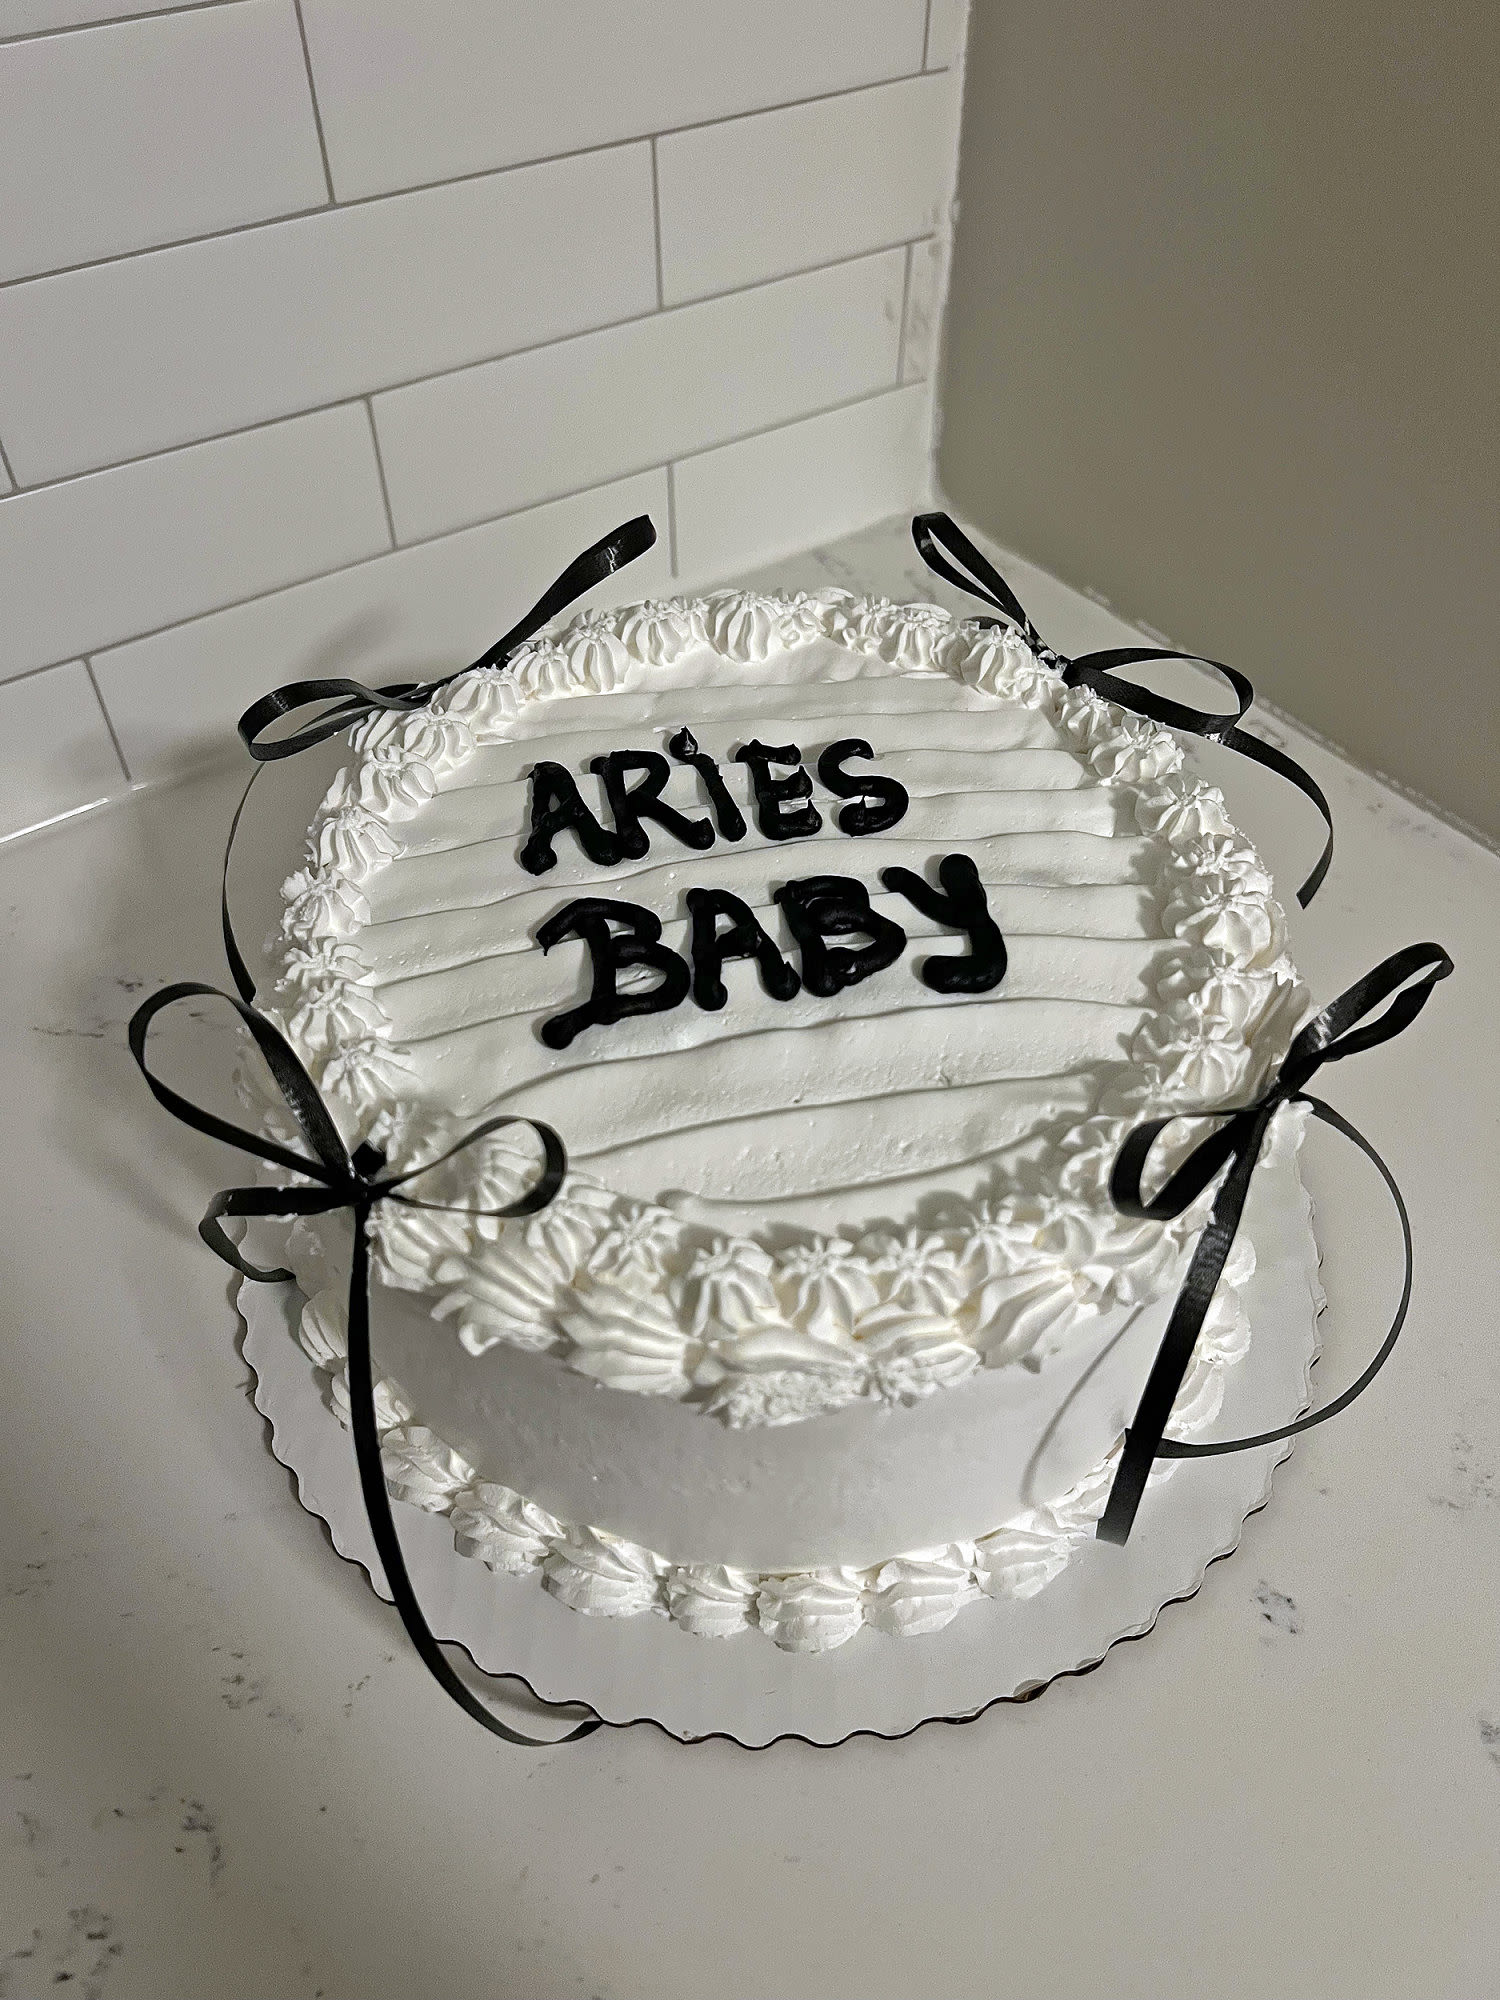 Walmart took this woman’s cake order way too literally and the result is hilarious